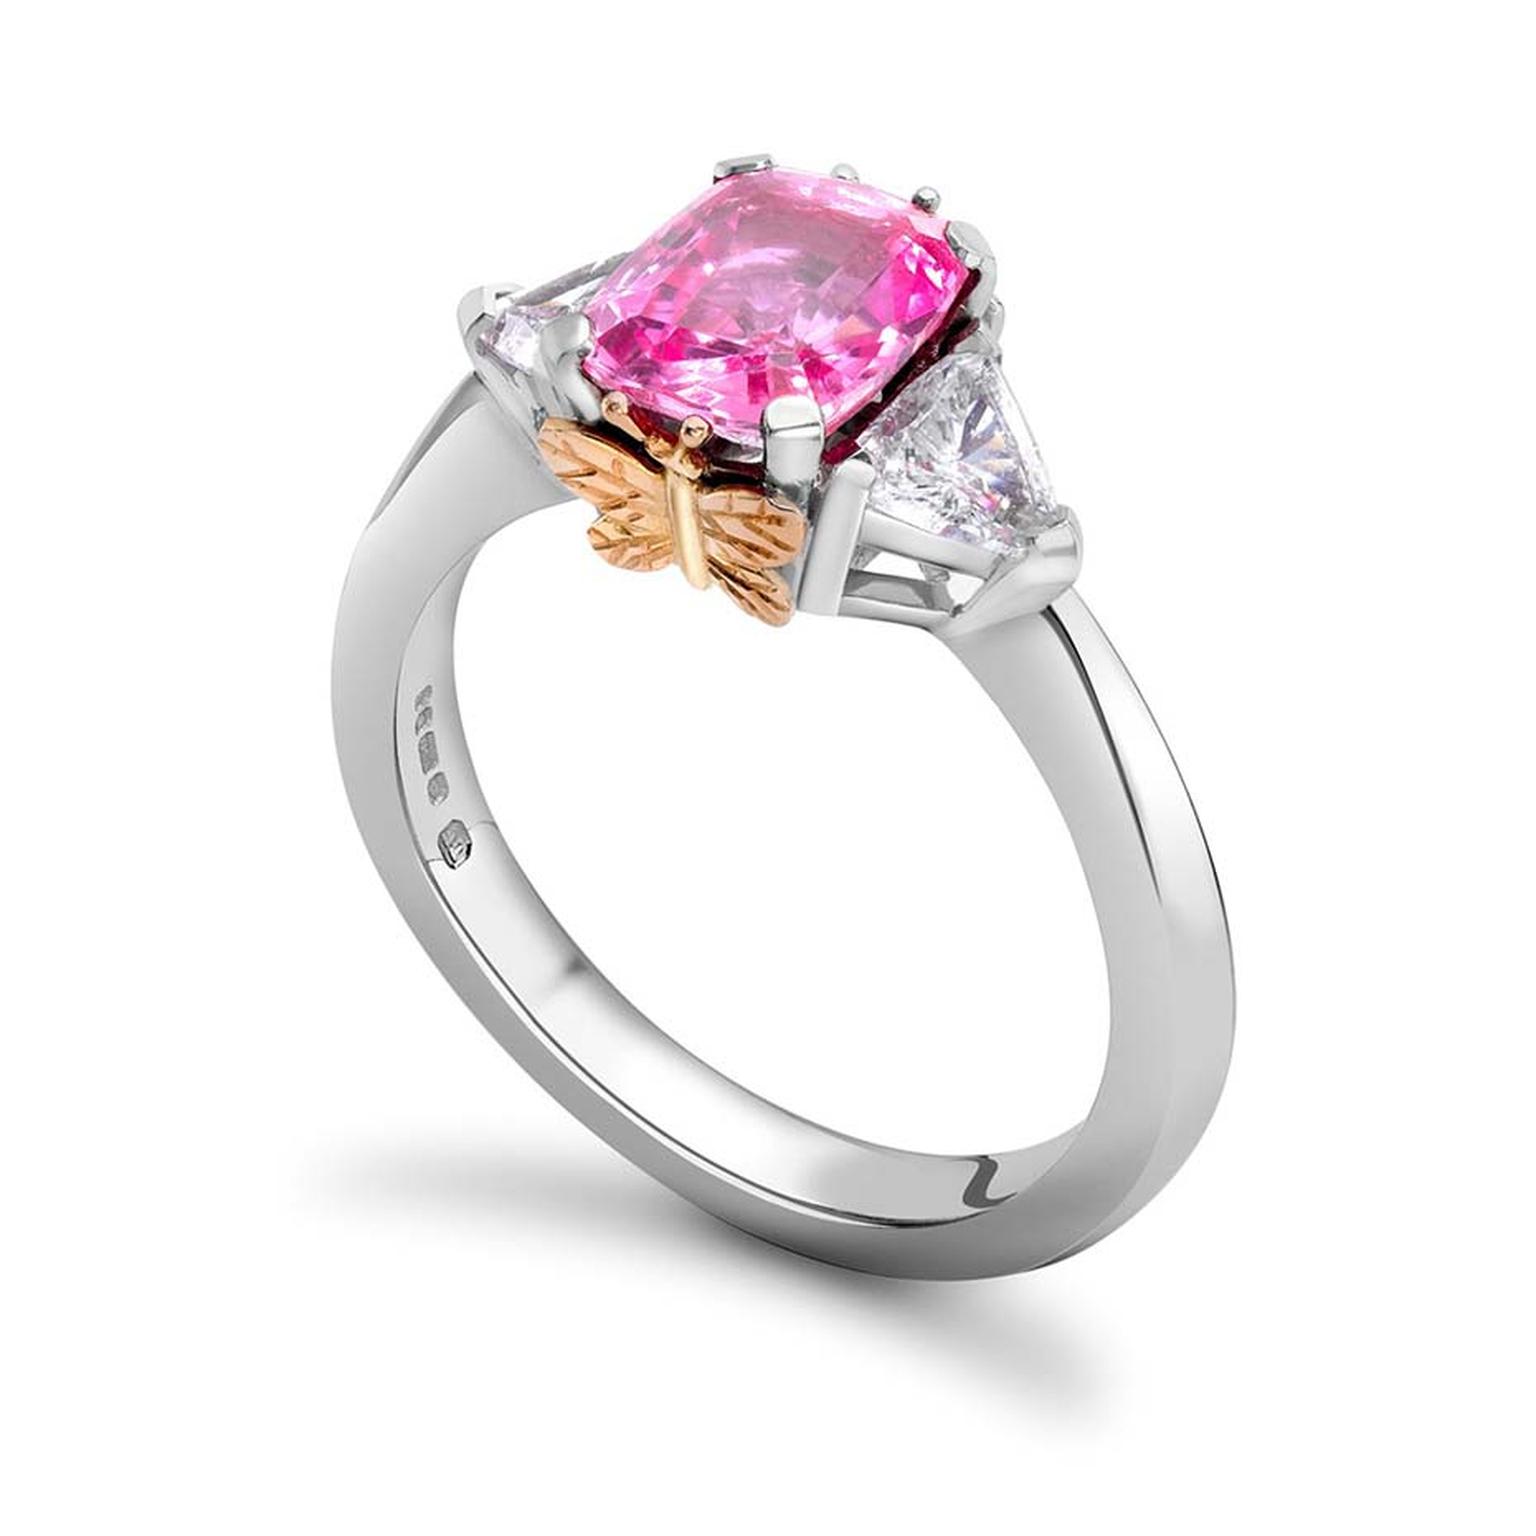 Theo Fennell pink sapphire and diamond Butterfly ring in white gold with a pink gold butterfly perched on the side of the centre stone.